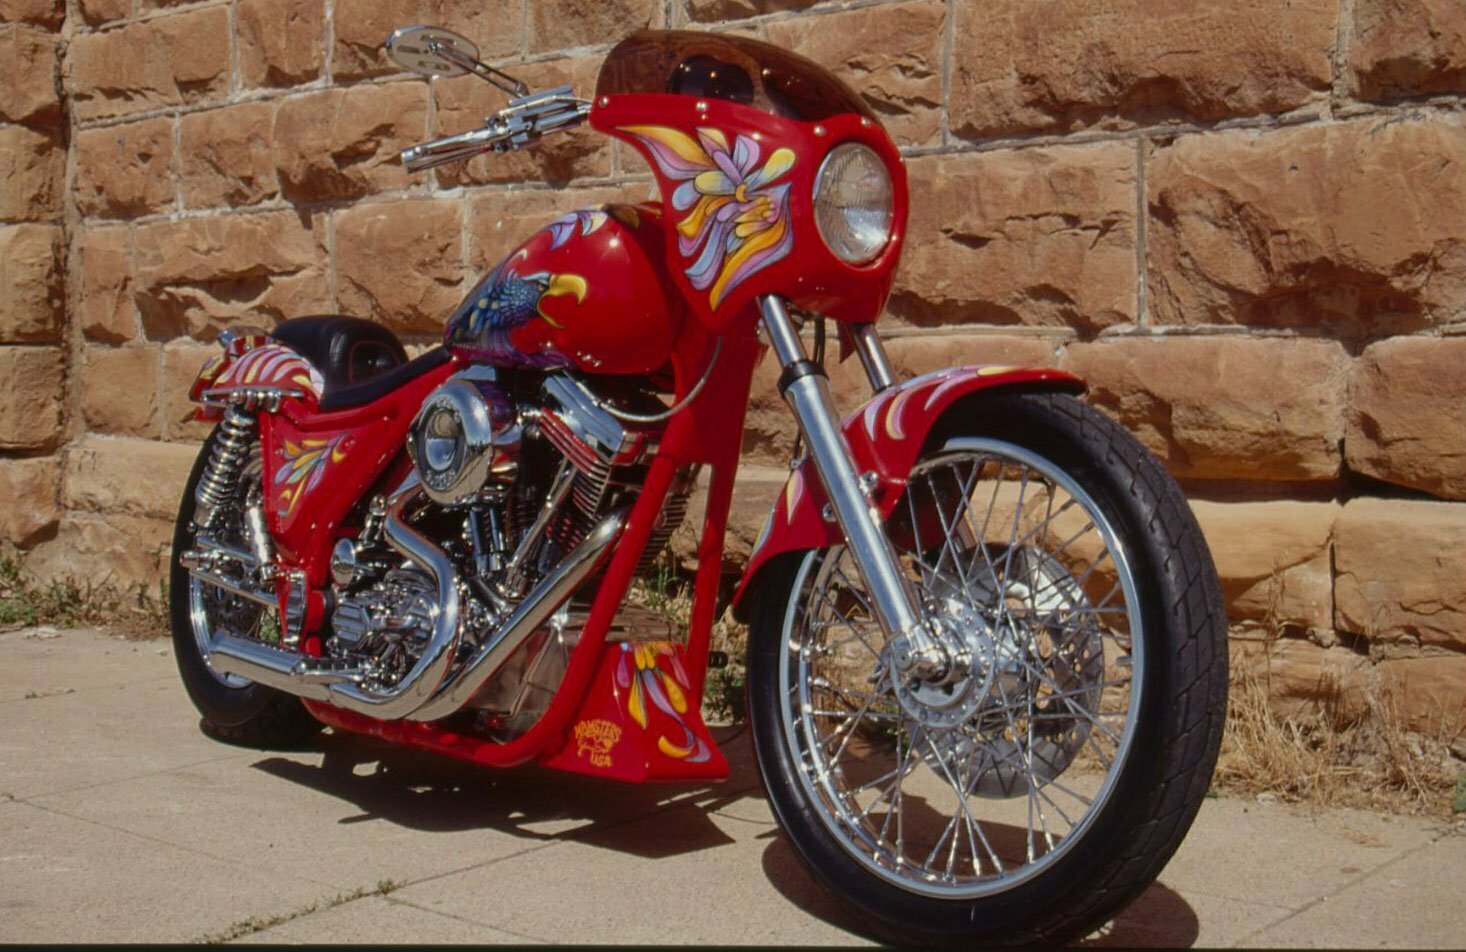 Thanks to its multicolor paint that resembles feathers, this FXRC was dubbed “The Chicken Bike.”